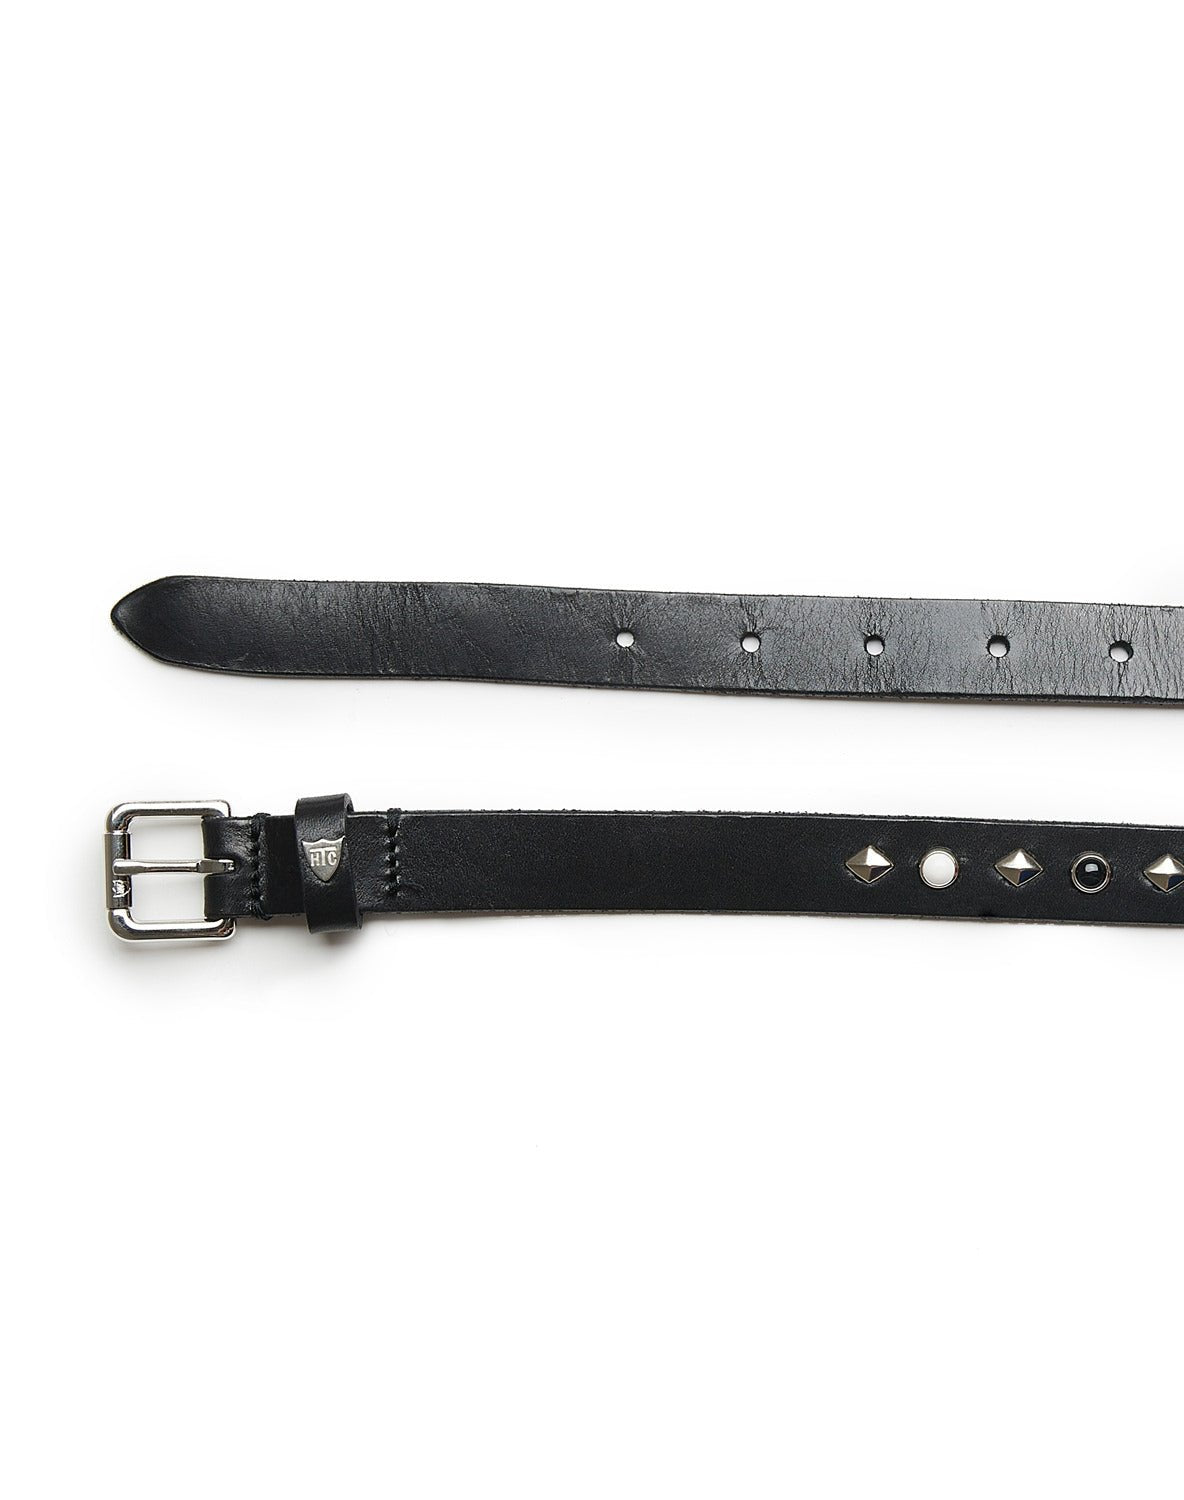 VENICE BELT Black leather belt, with rhombus studs and colored stones. Brass buckle. Height: 2,5 cm. HTC LOS ANGELES